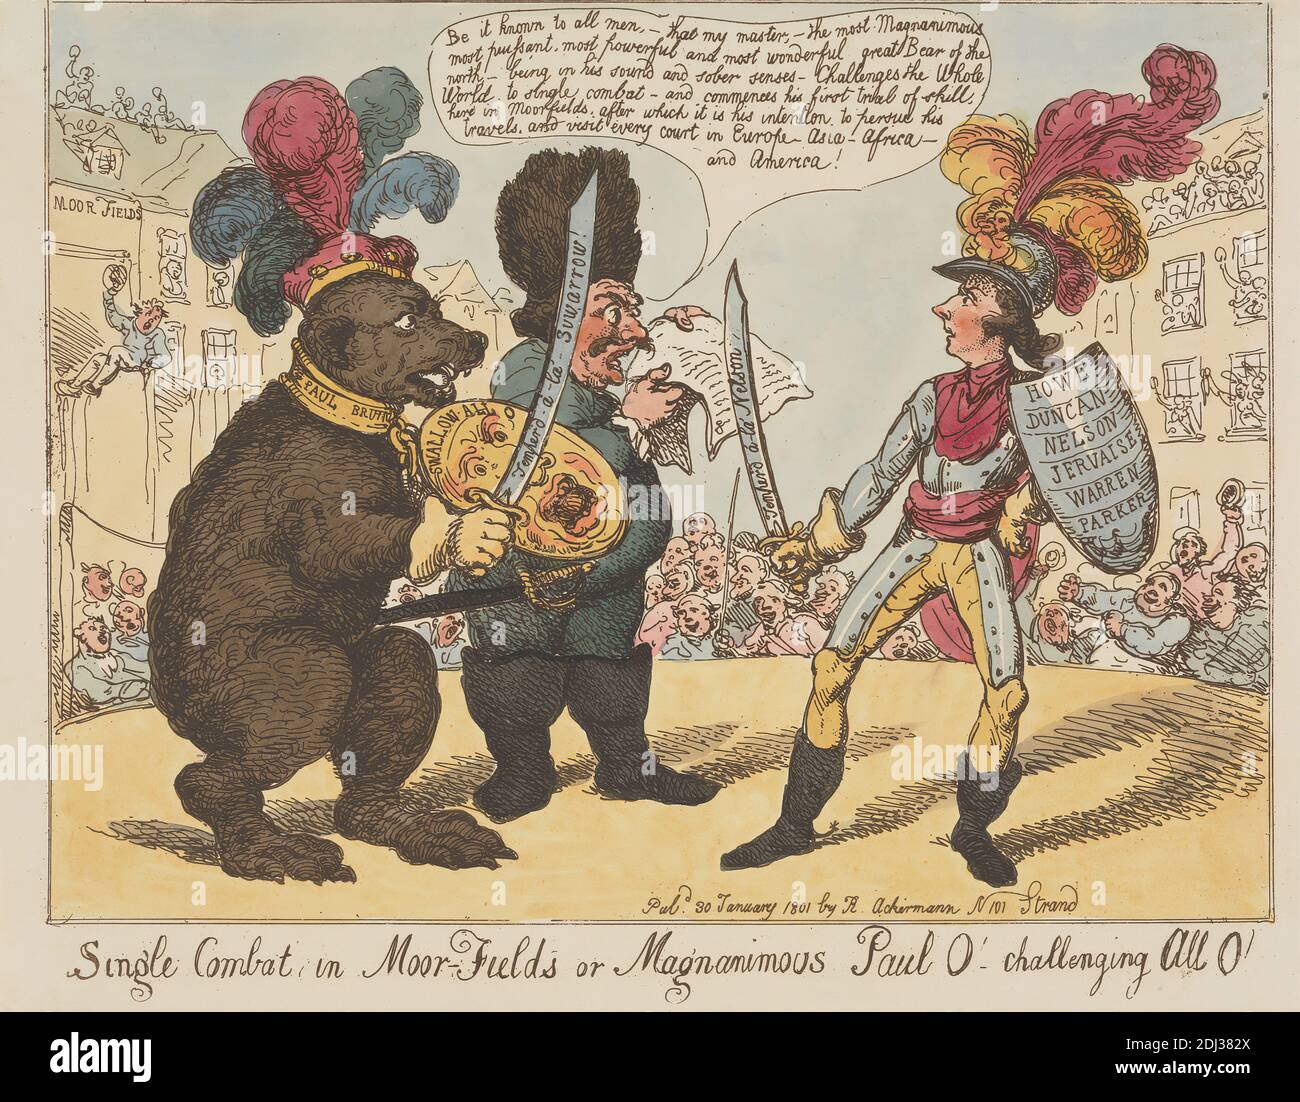 Single Combat, in Moorfields, or Magnanimous Paul O! - Challenging all O! (from: Caricature, vol. 4), Thomas Rowlandson, 1756–1827, British, 1801, Etching, hand-colored, Sheet: 9 5/8 x 12 3/4in. (24.4 x 32.4cm Stock Photo